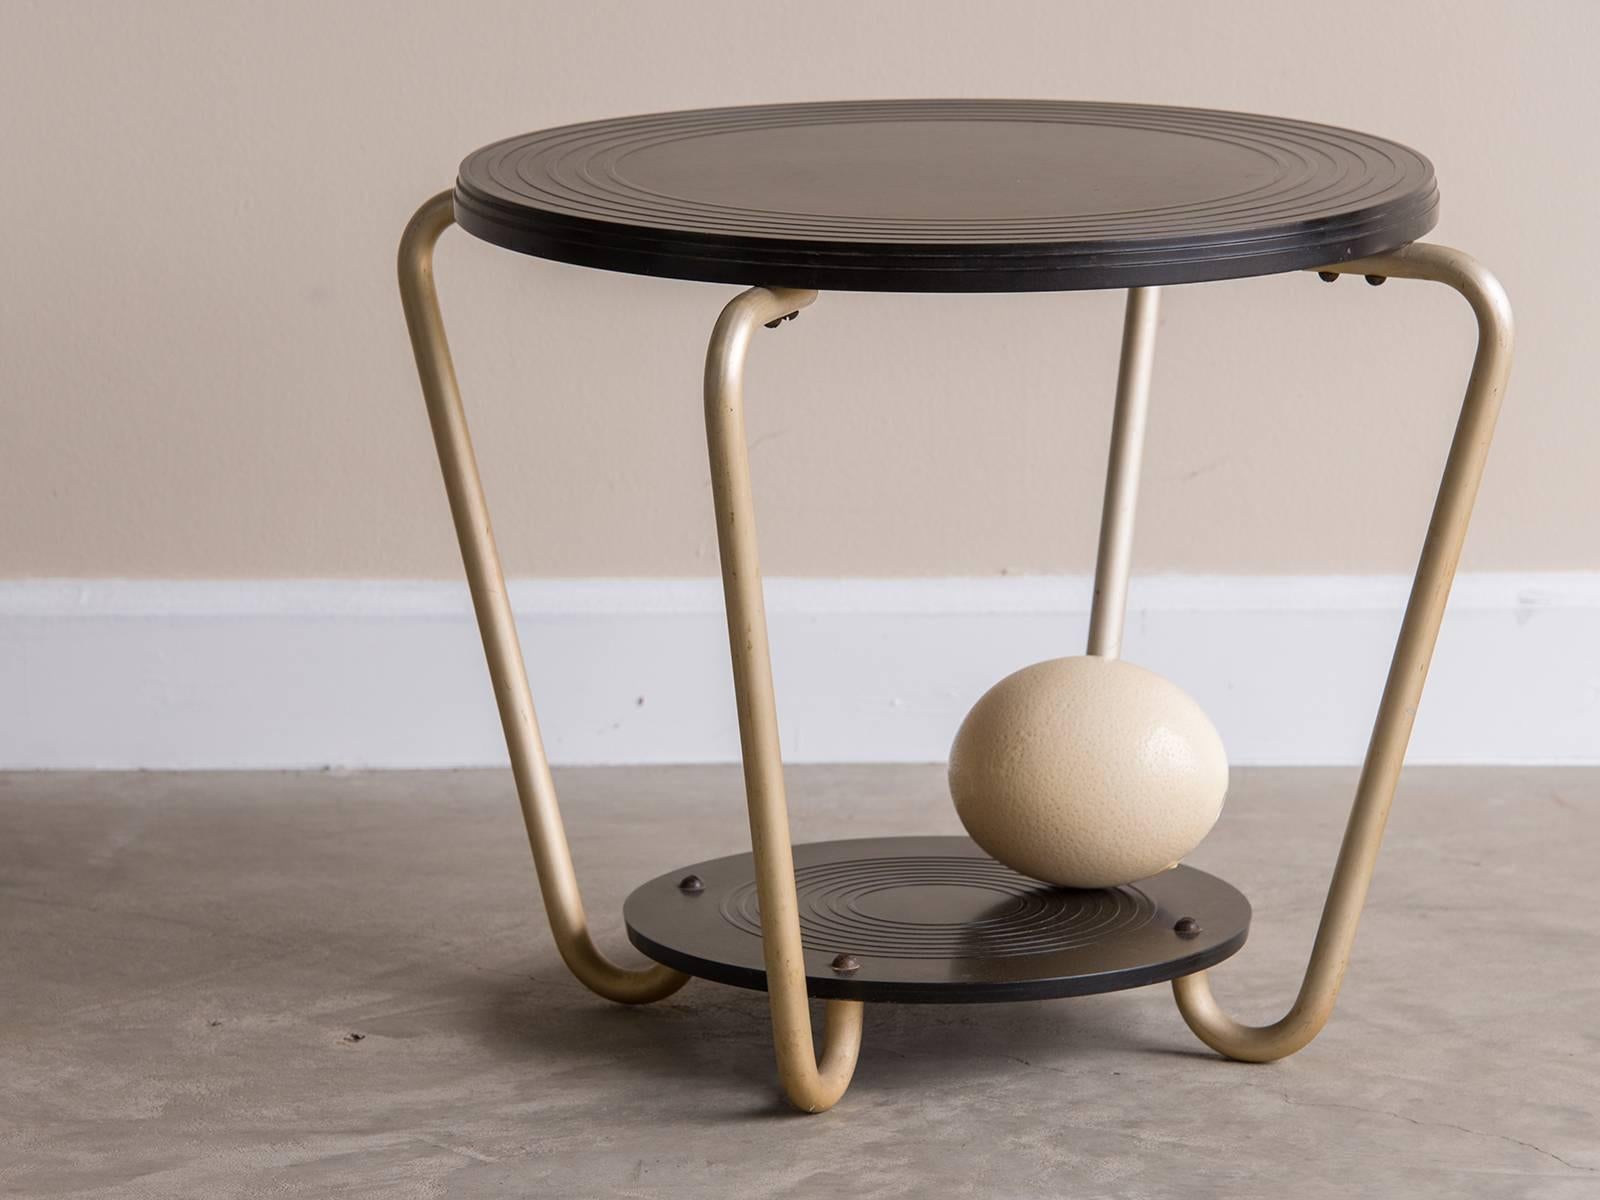 Receive our new selections direct from 1stdibs by email each week. Please click on “Follow Dealer” button below and see them first!

The circular top of this vintage French Mid-Century table, circa 1940 is made of the revolutionary material bakelite